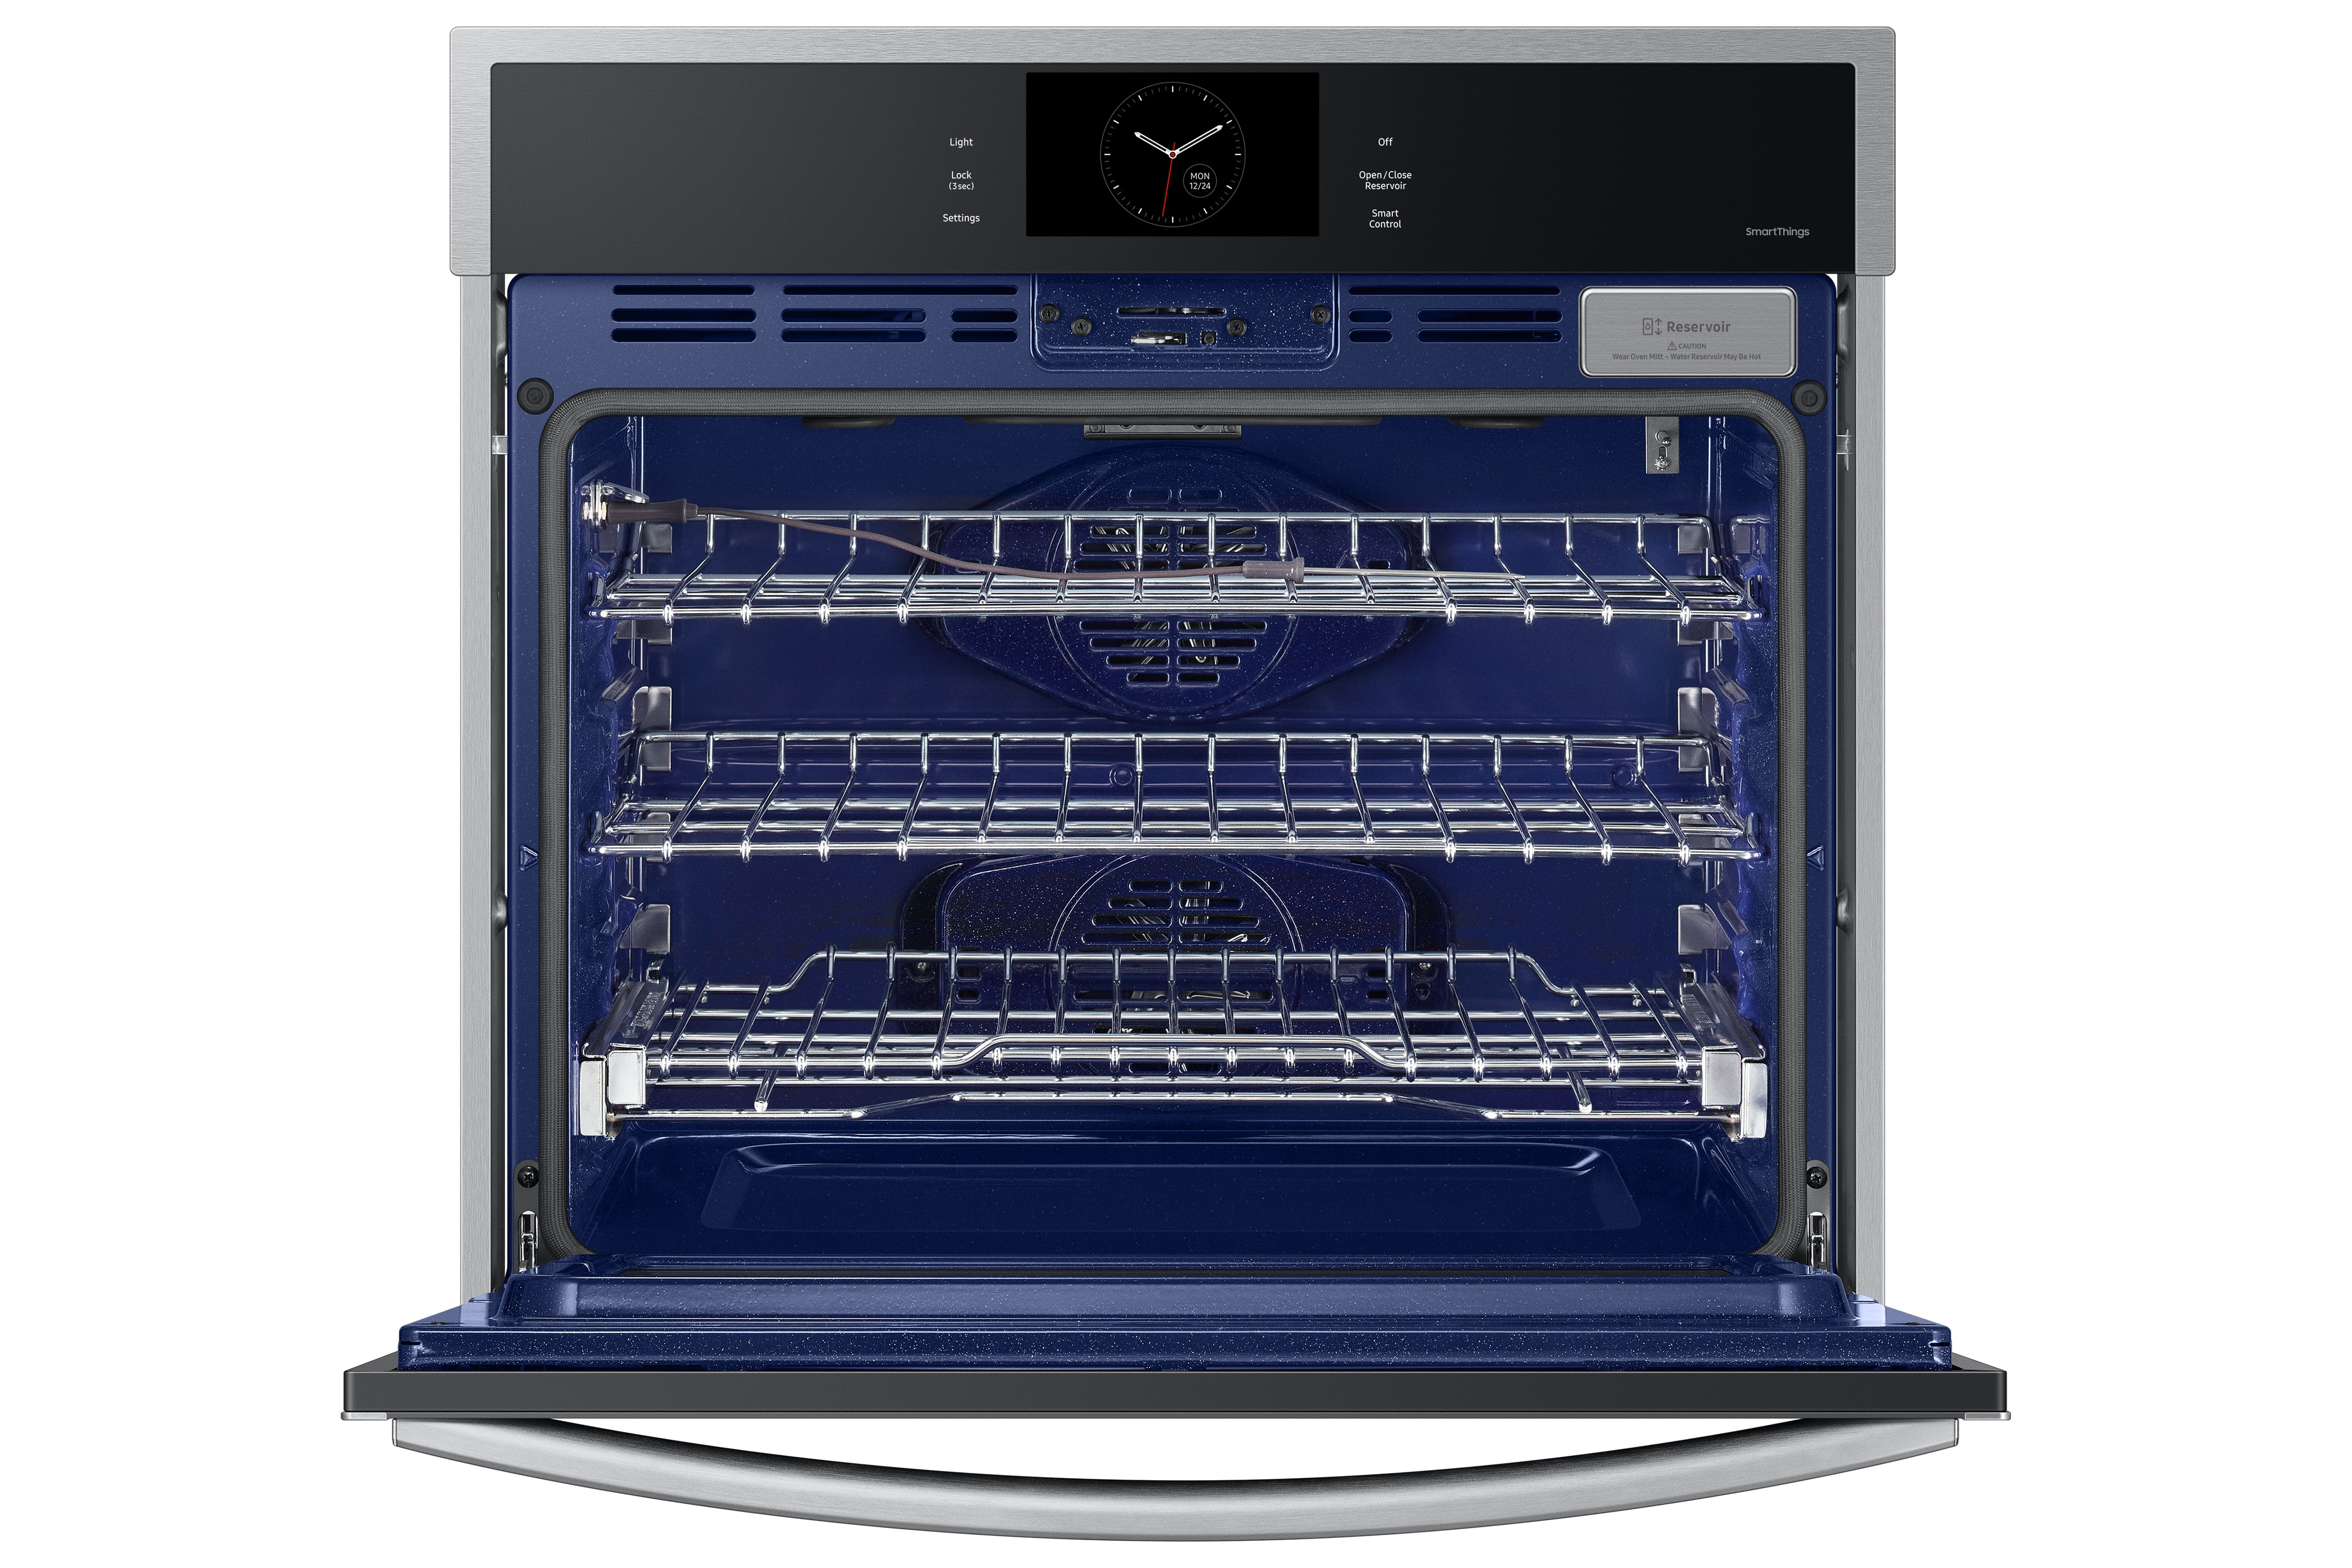 Samsung - 5.1 cu. ft Single Wall Oven in Stainless - NV51CG600SSRAA